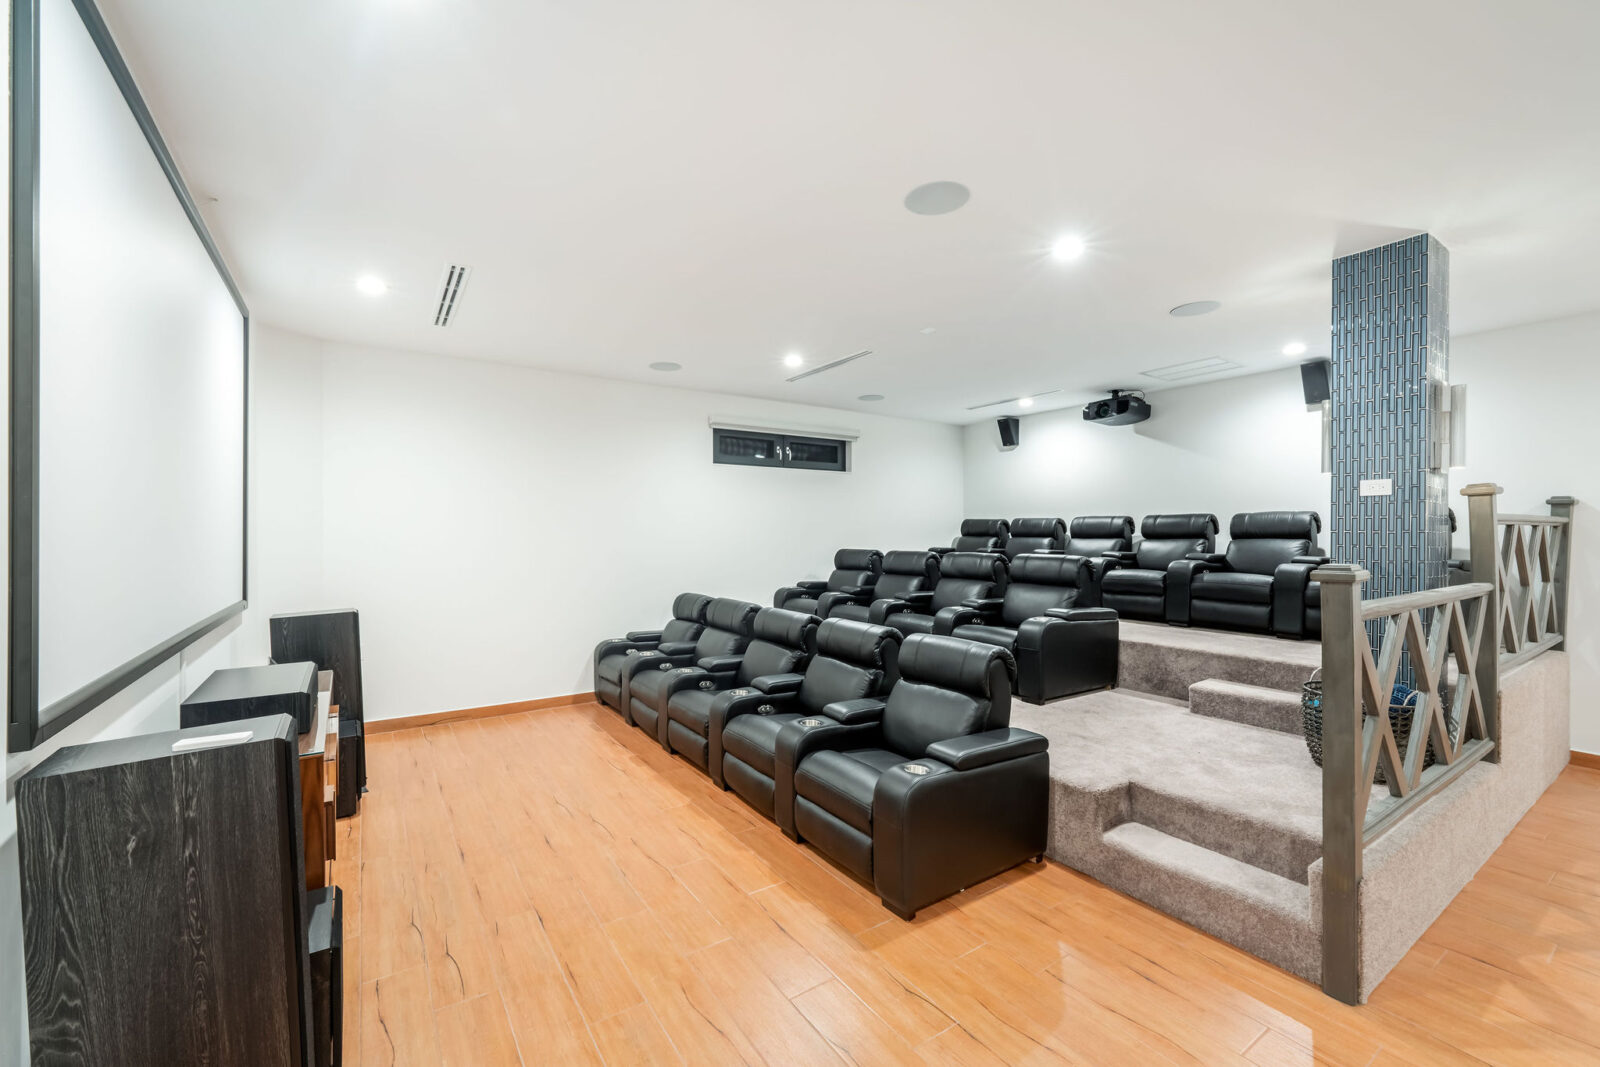 Fourteen Recliners lined up and facing a big projector screen.